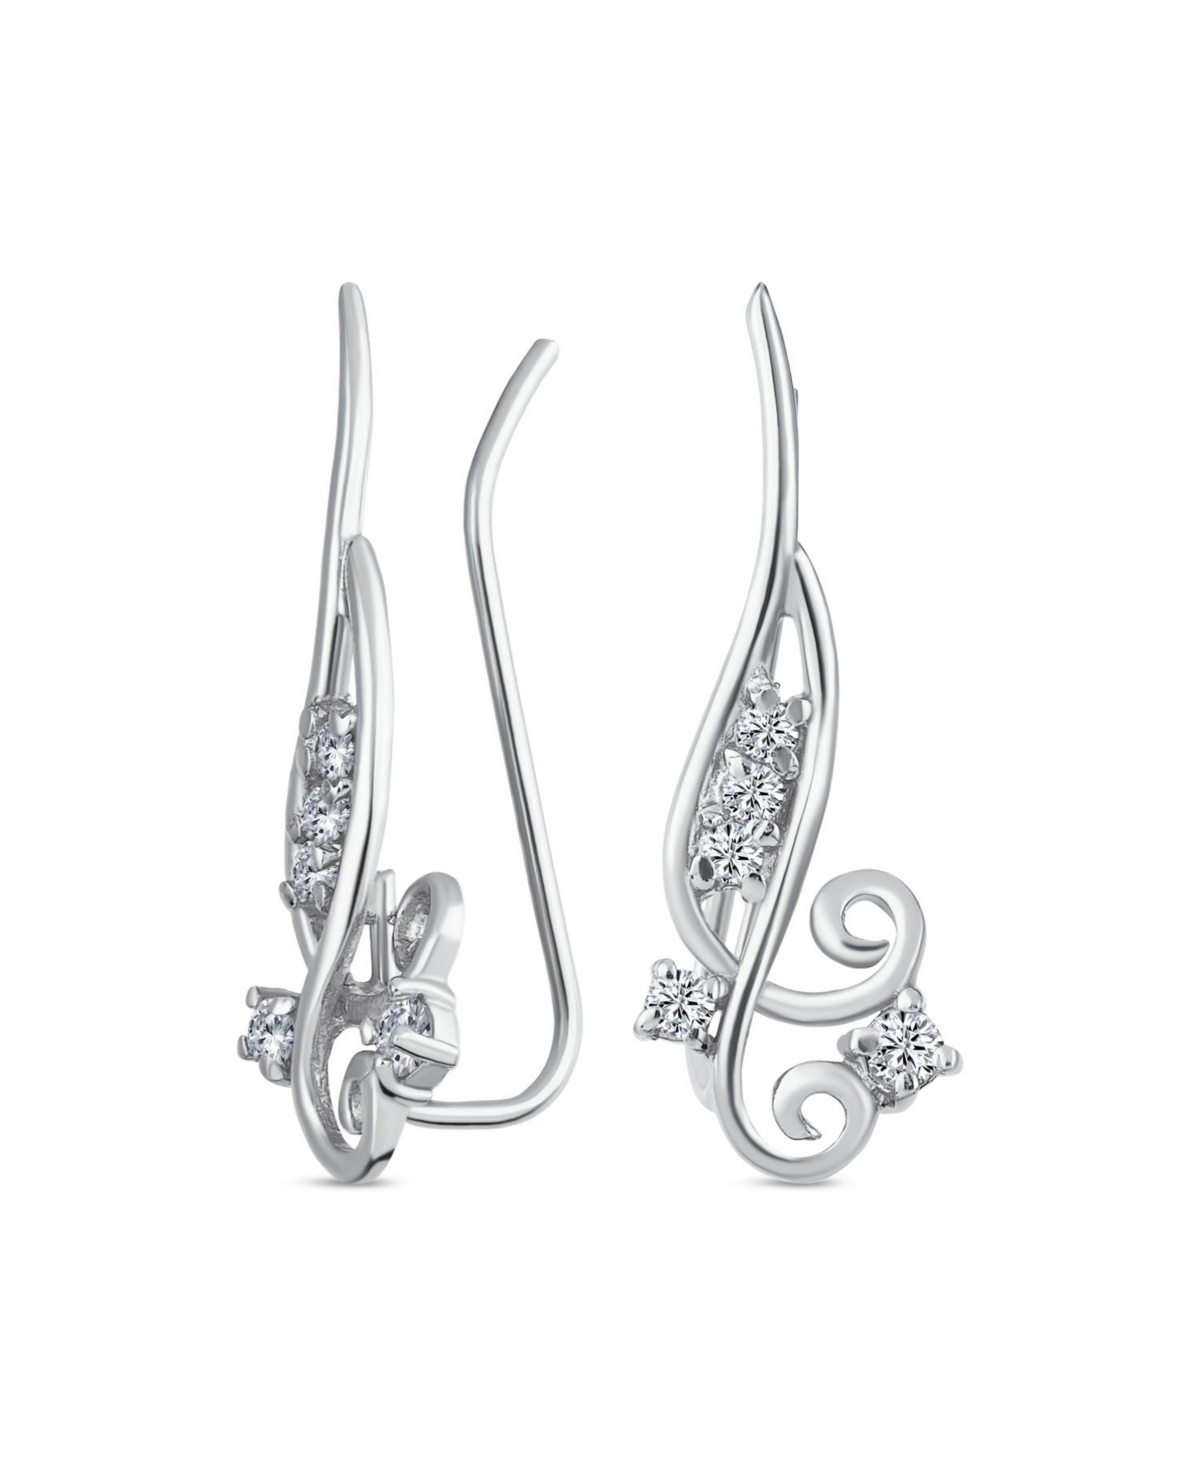 Cz Swirl Wire Ear Pin Climbers Crawlers Earrings For Women For Teen Round Cubic Zirconia .925 Sterling Silver - Silver